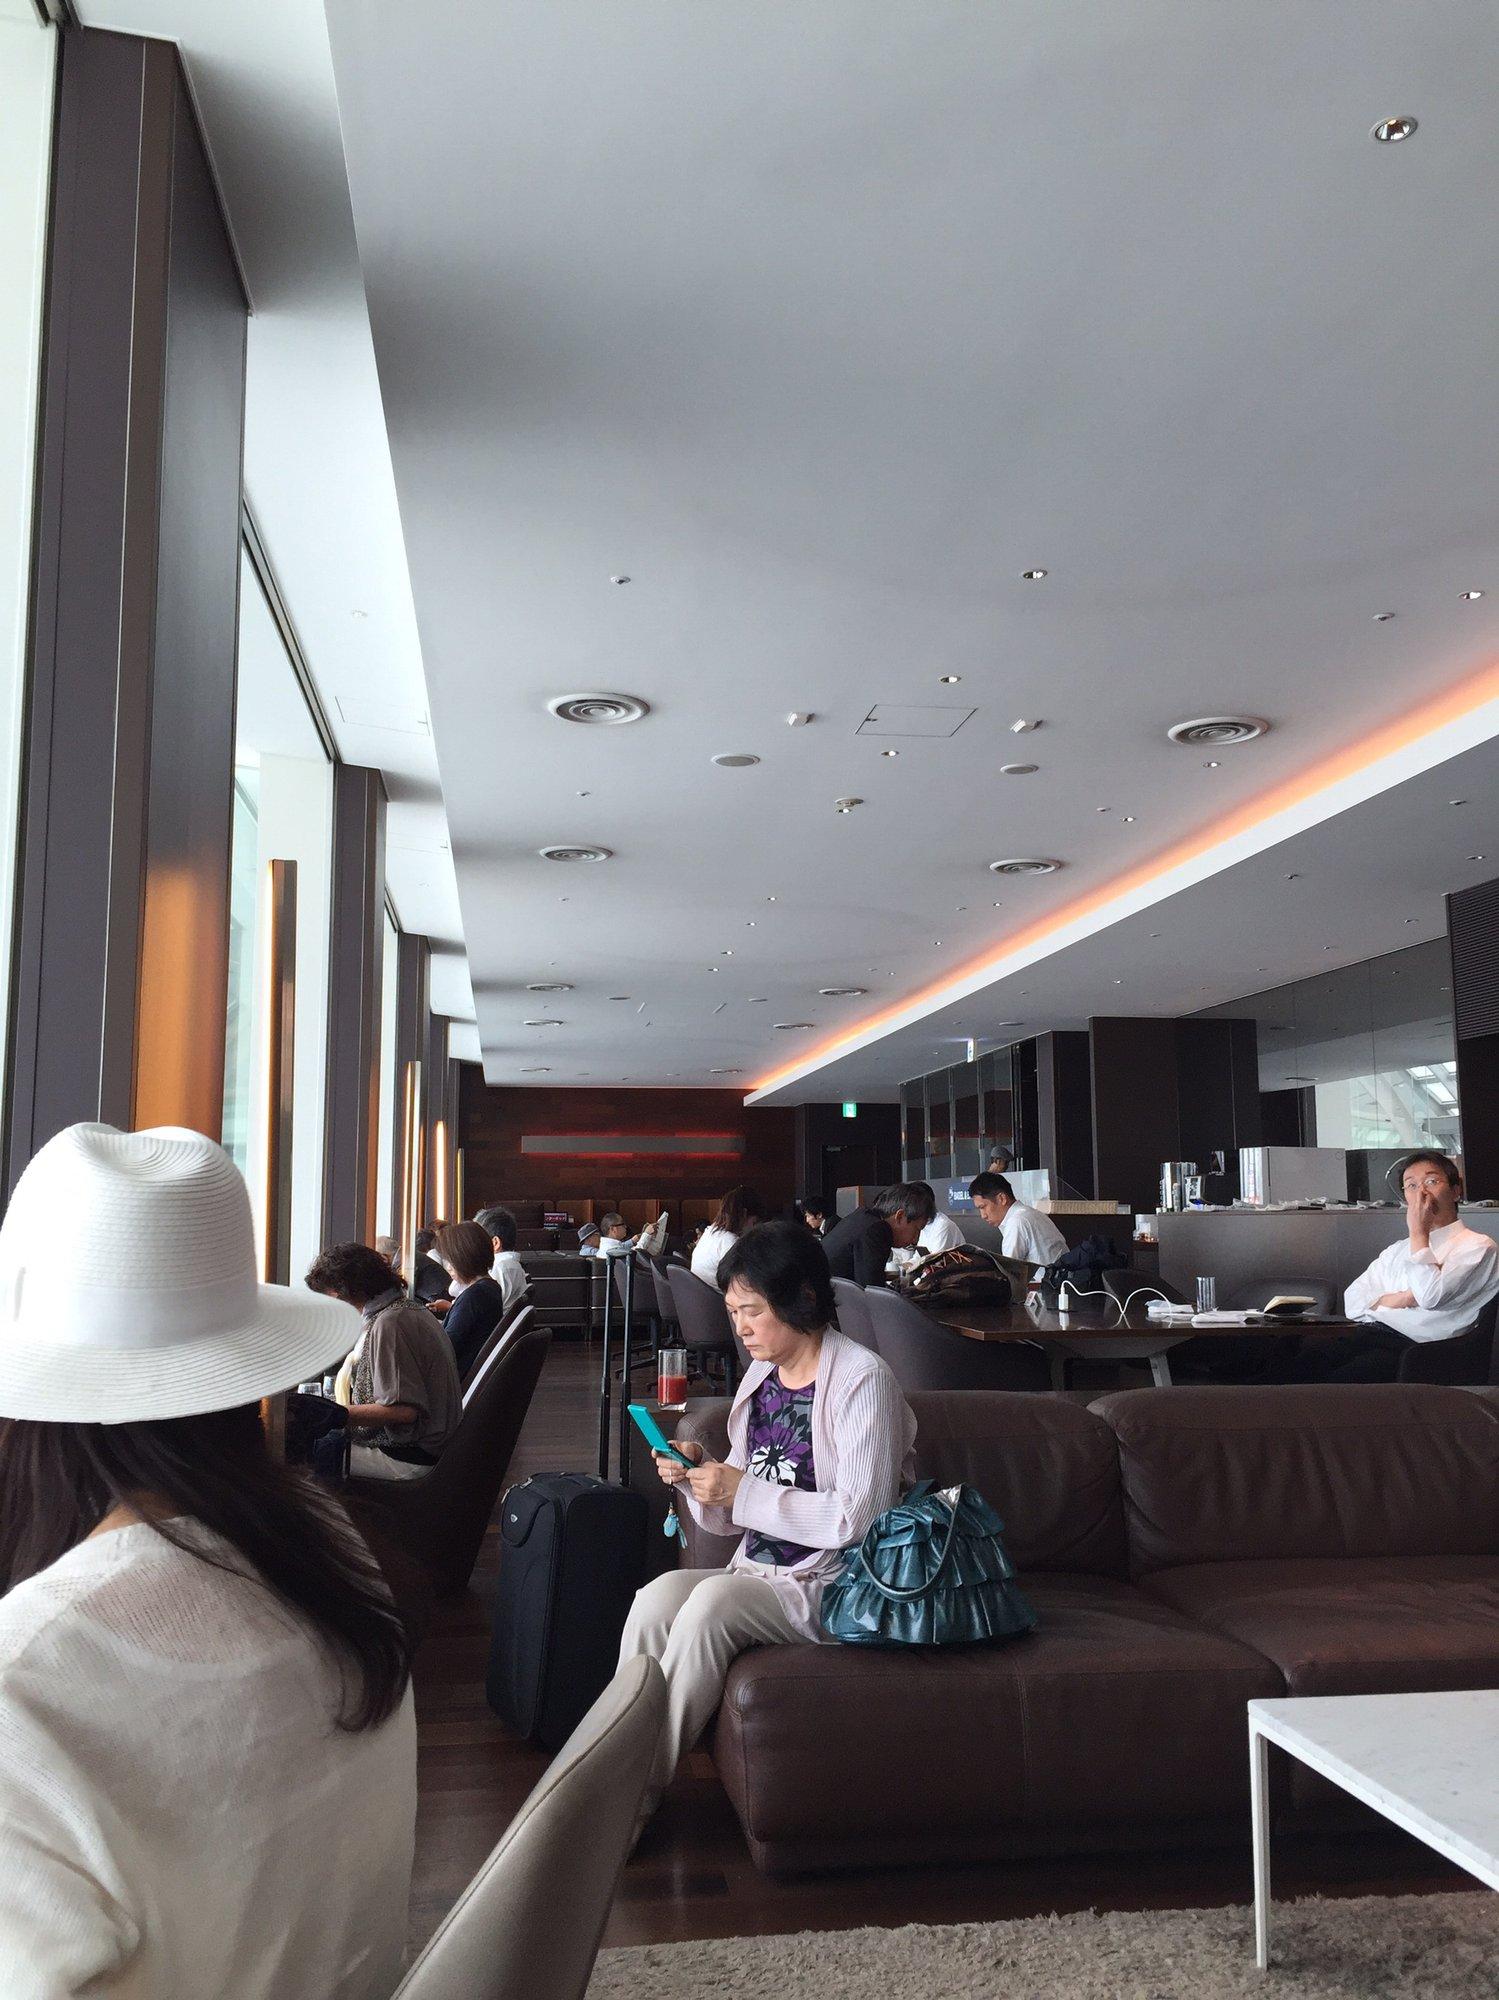 Airport Lounge (South) image 14 of 21